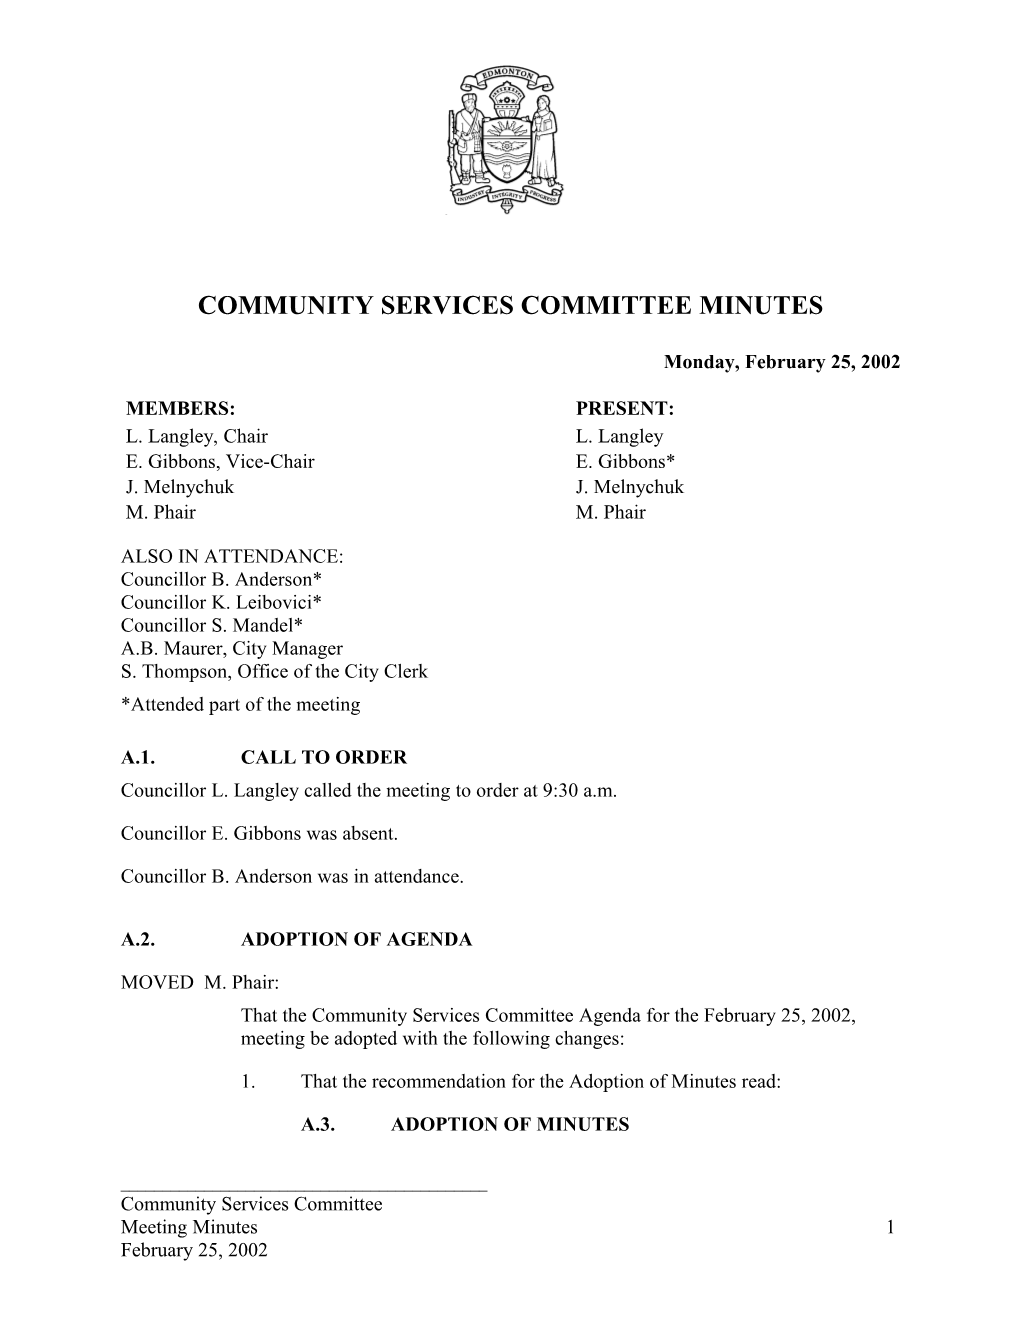 Minutes for Community Services Committee February 25, 2002 Meeting